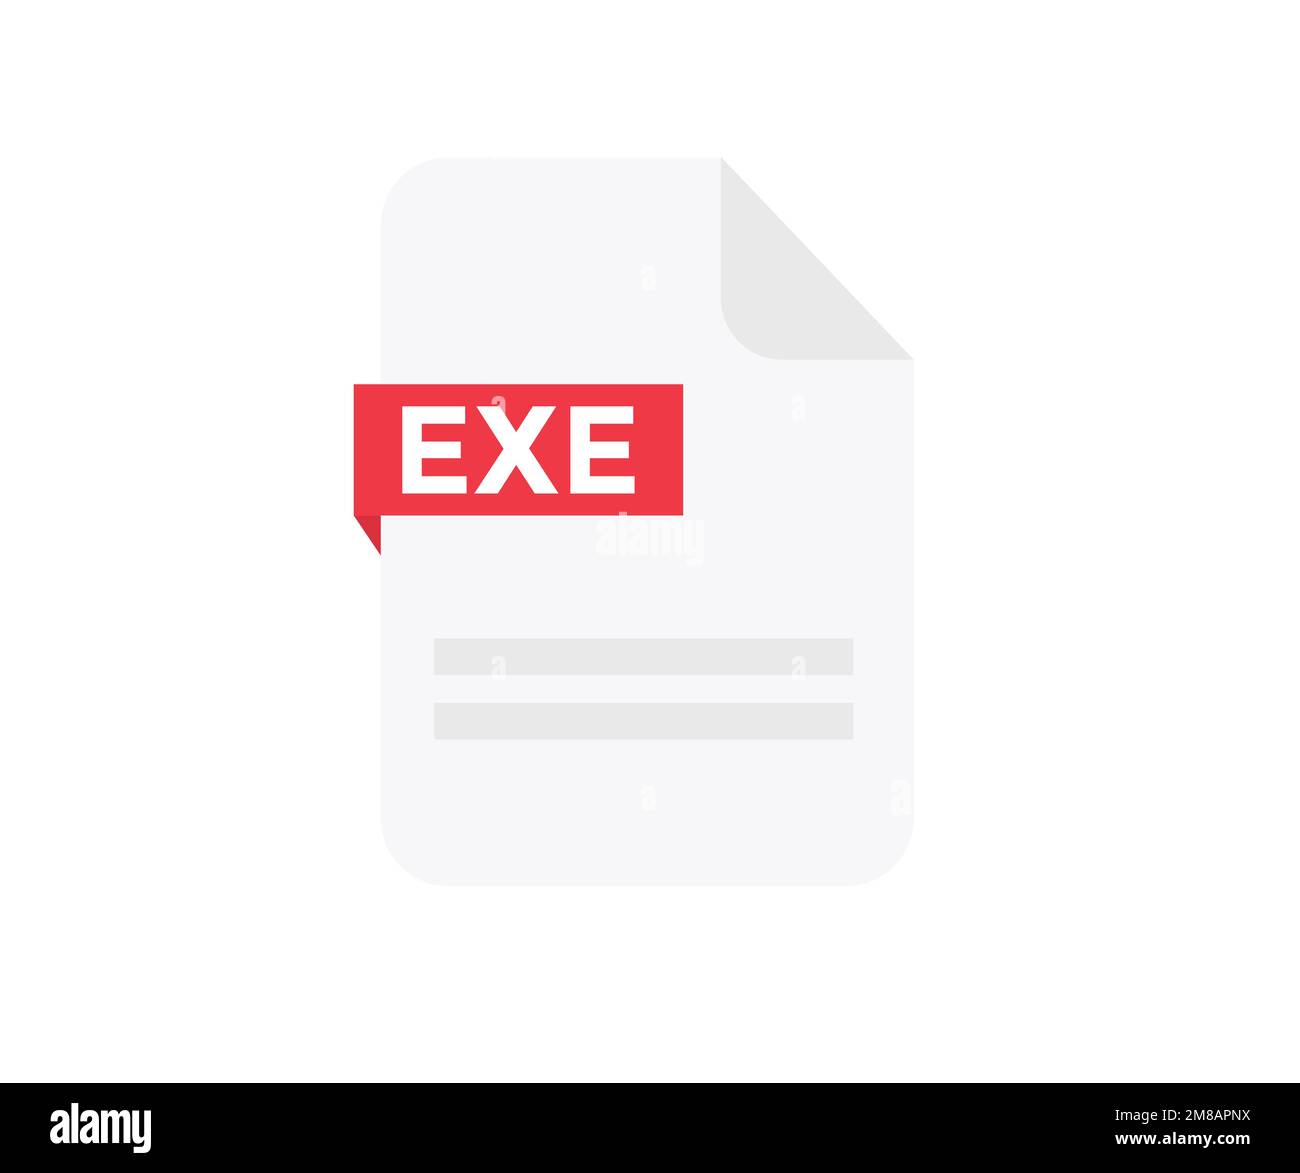 File format EXE logo design. Document file icon. Element for applications, web sites & data services. Format and extension of documents vector design. Stock Vector